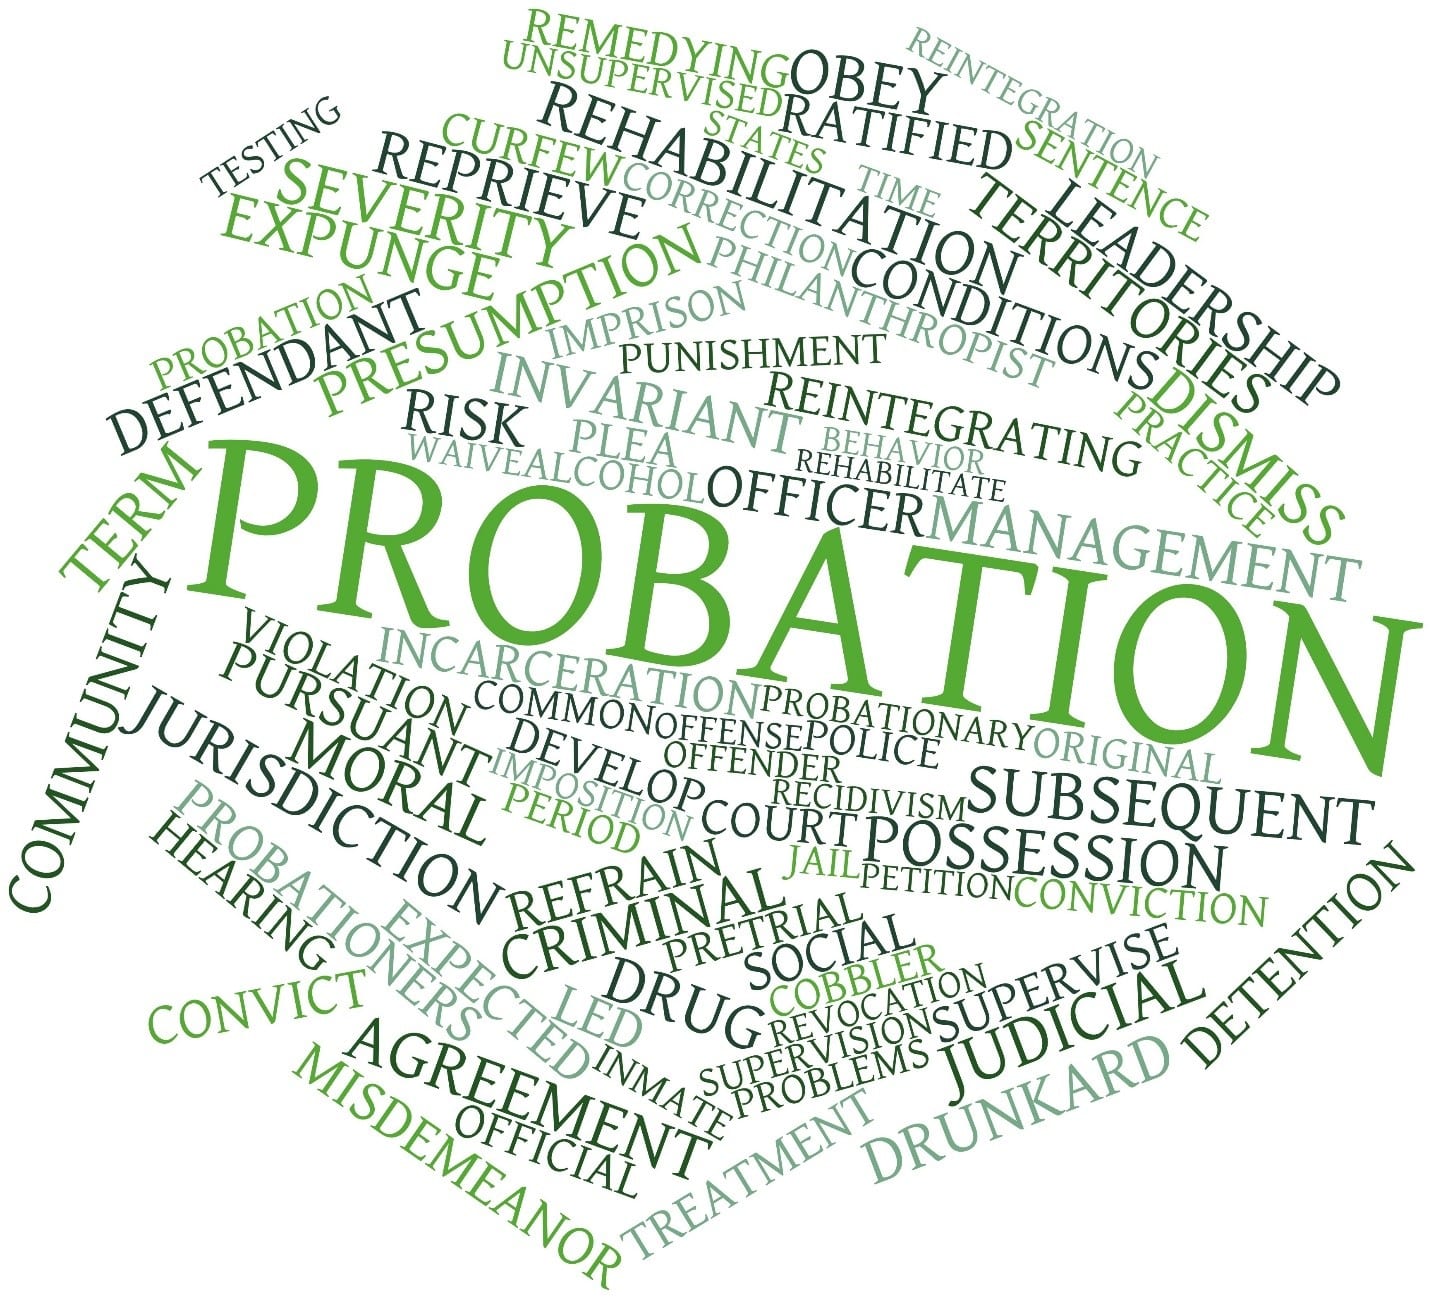 6 Ways to Defend Against a Minnesota Probation Violation Charge